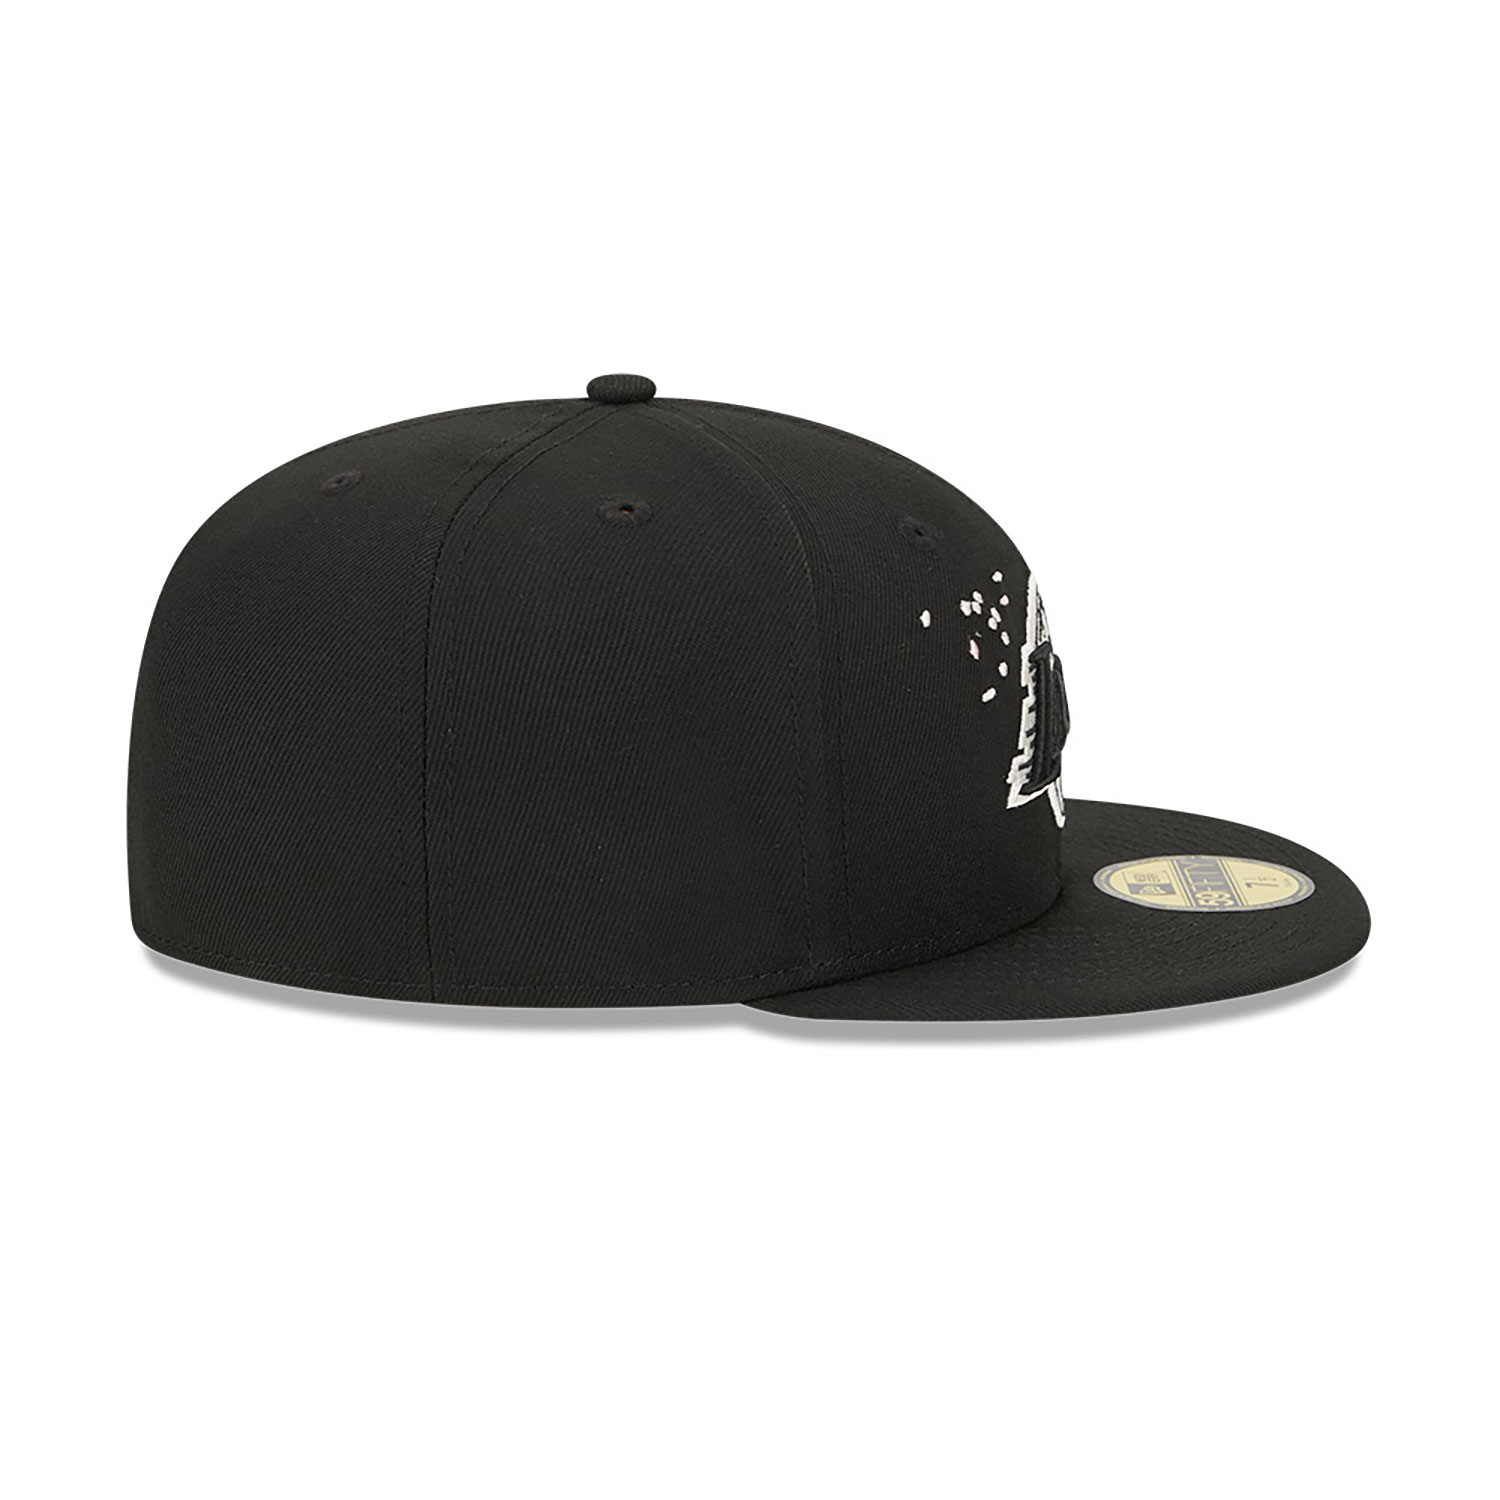 LA Lakers Cherry Blossom Black 59FIFTY Fitted Cap